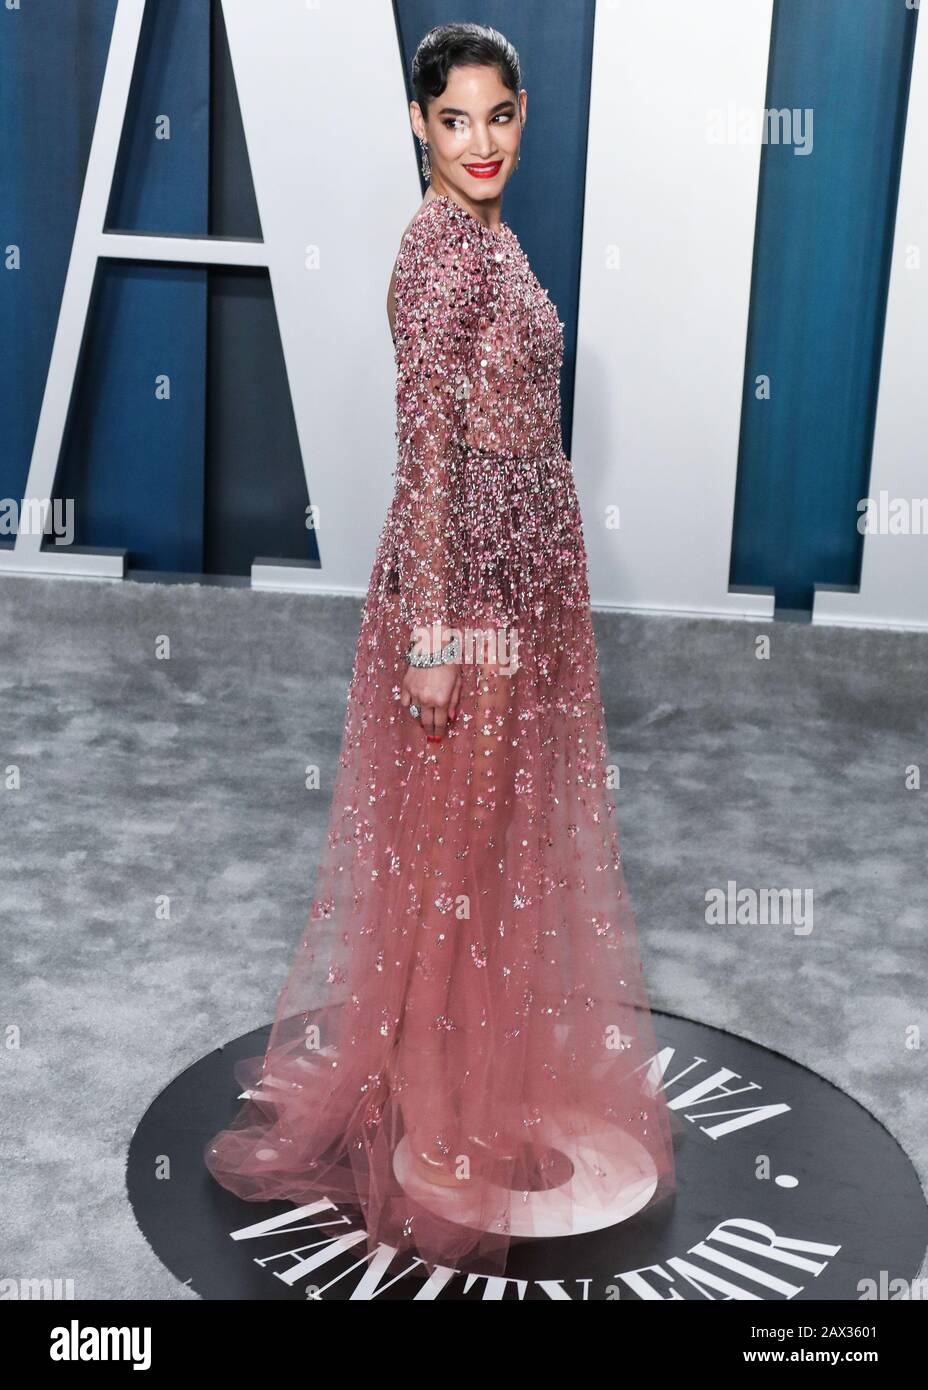 Beverly Hills, United States. 10th Feb, 2020. BEVERLY HILLS, LOS ANGELES,  CALIFORNIA, USA - FEBRUARY 09: Actress Sofia Boutella wearing Valentino and  Neil Lane jewelry arrives at the 2020 Vanity Fair Oscar